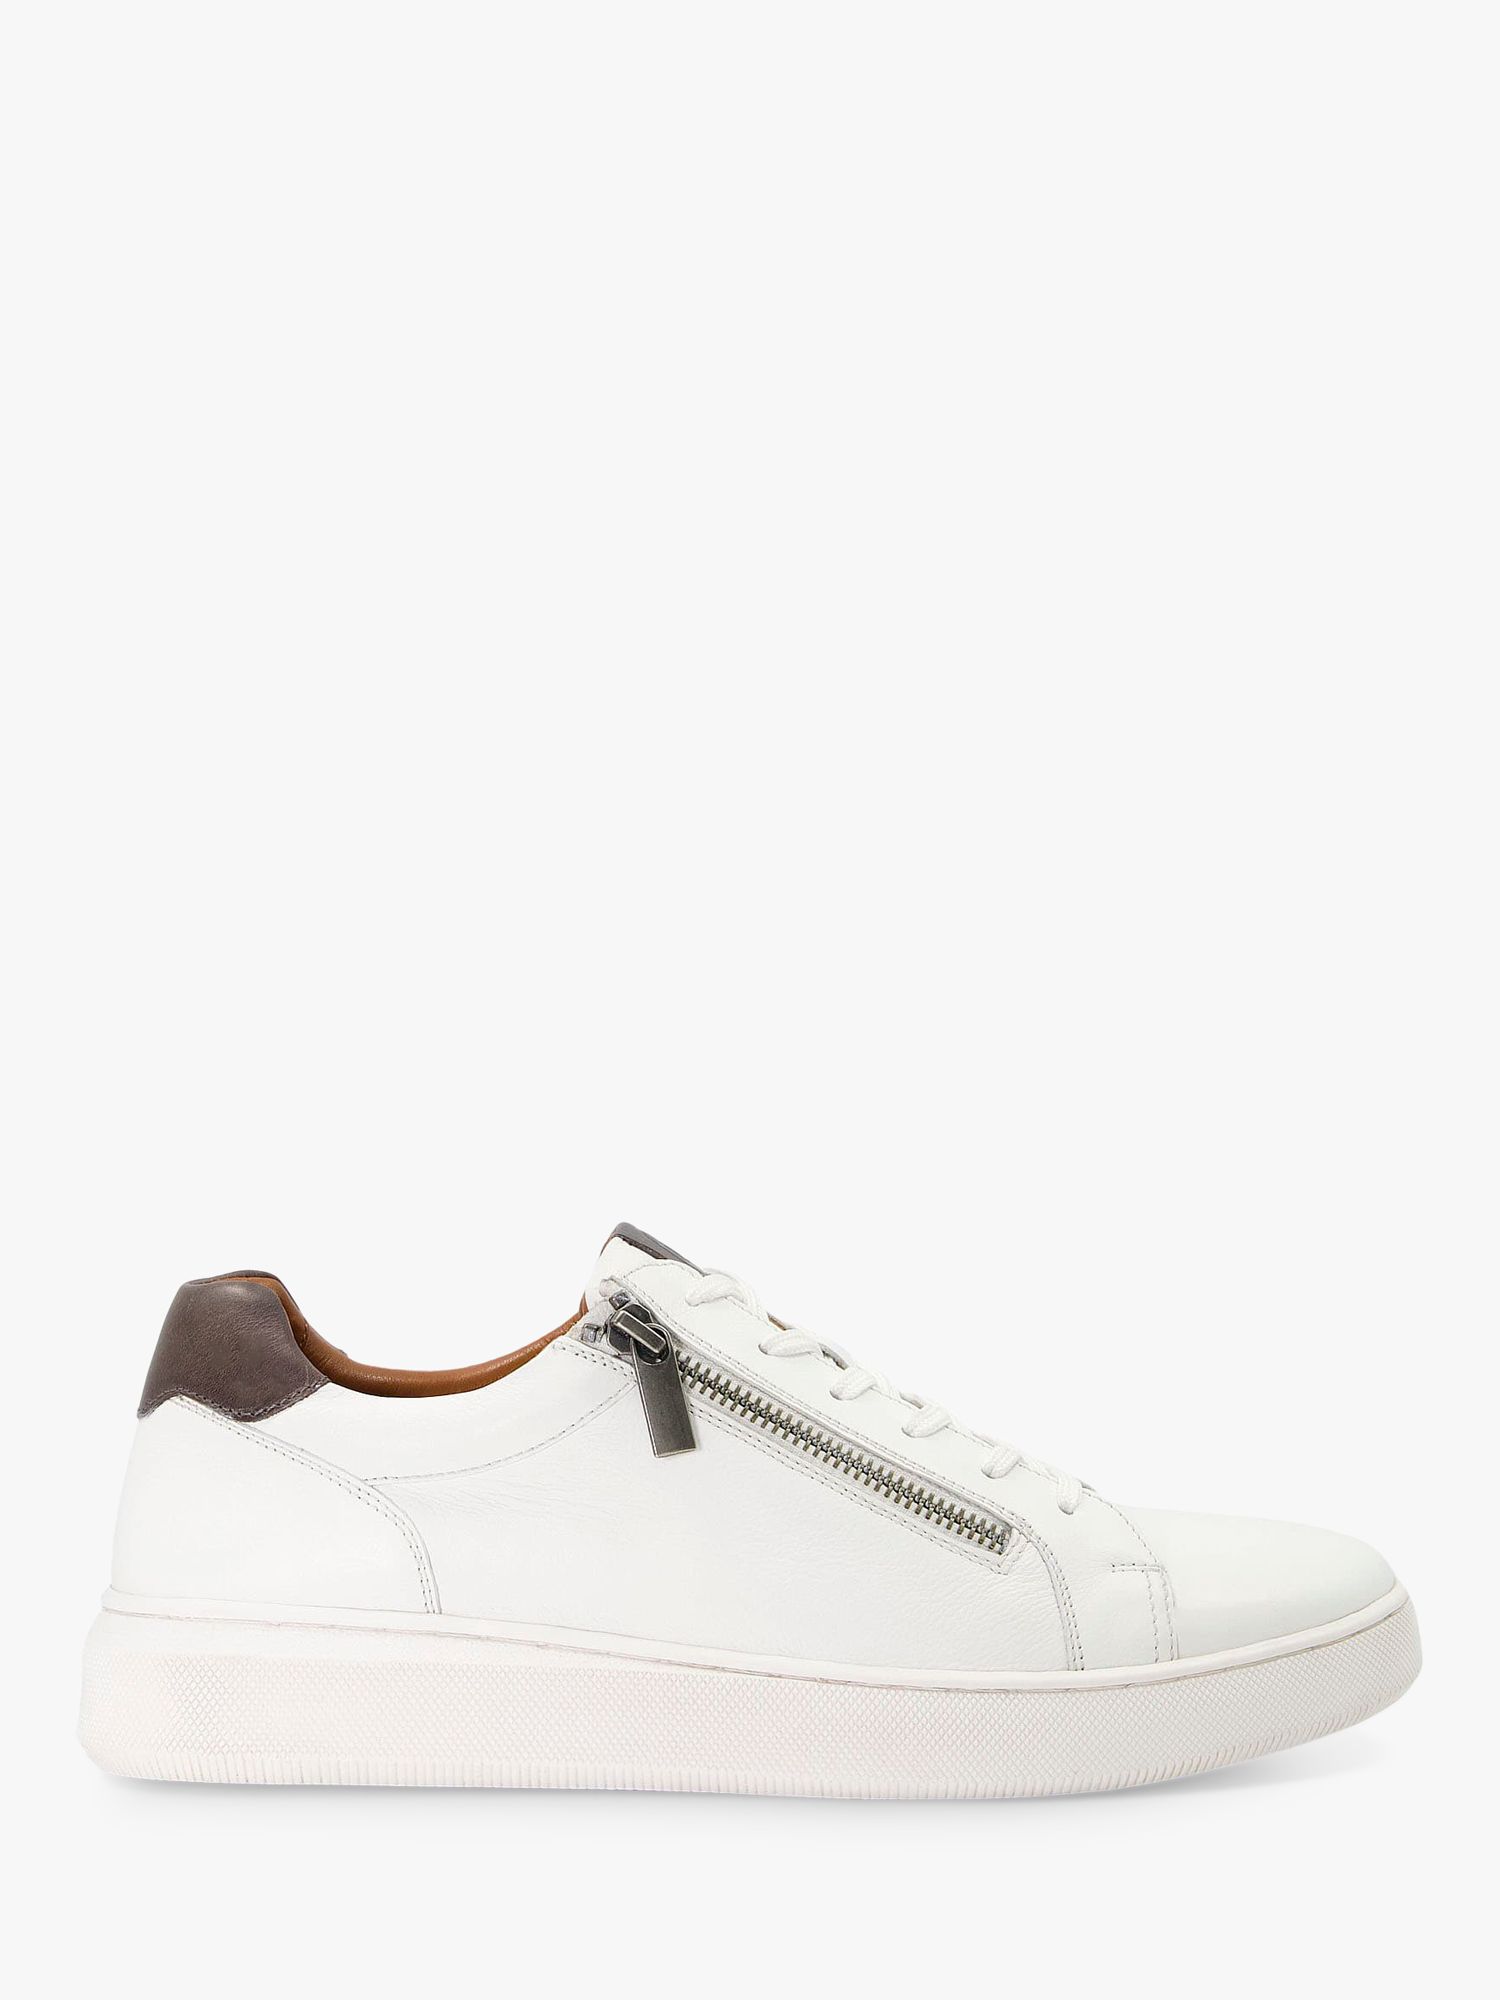 Dune Tribute Zip Detail Cup Sole Trainers, White at John Lewis & Partners